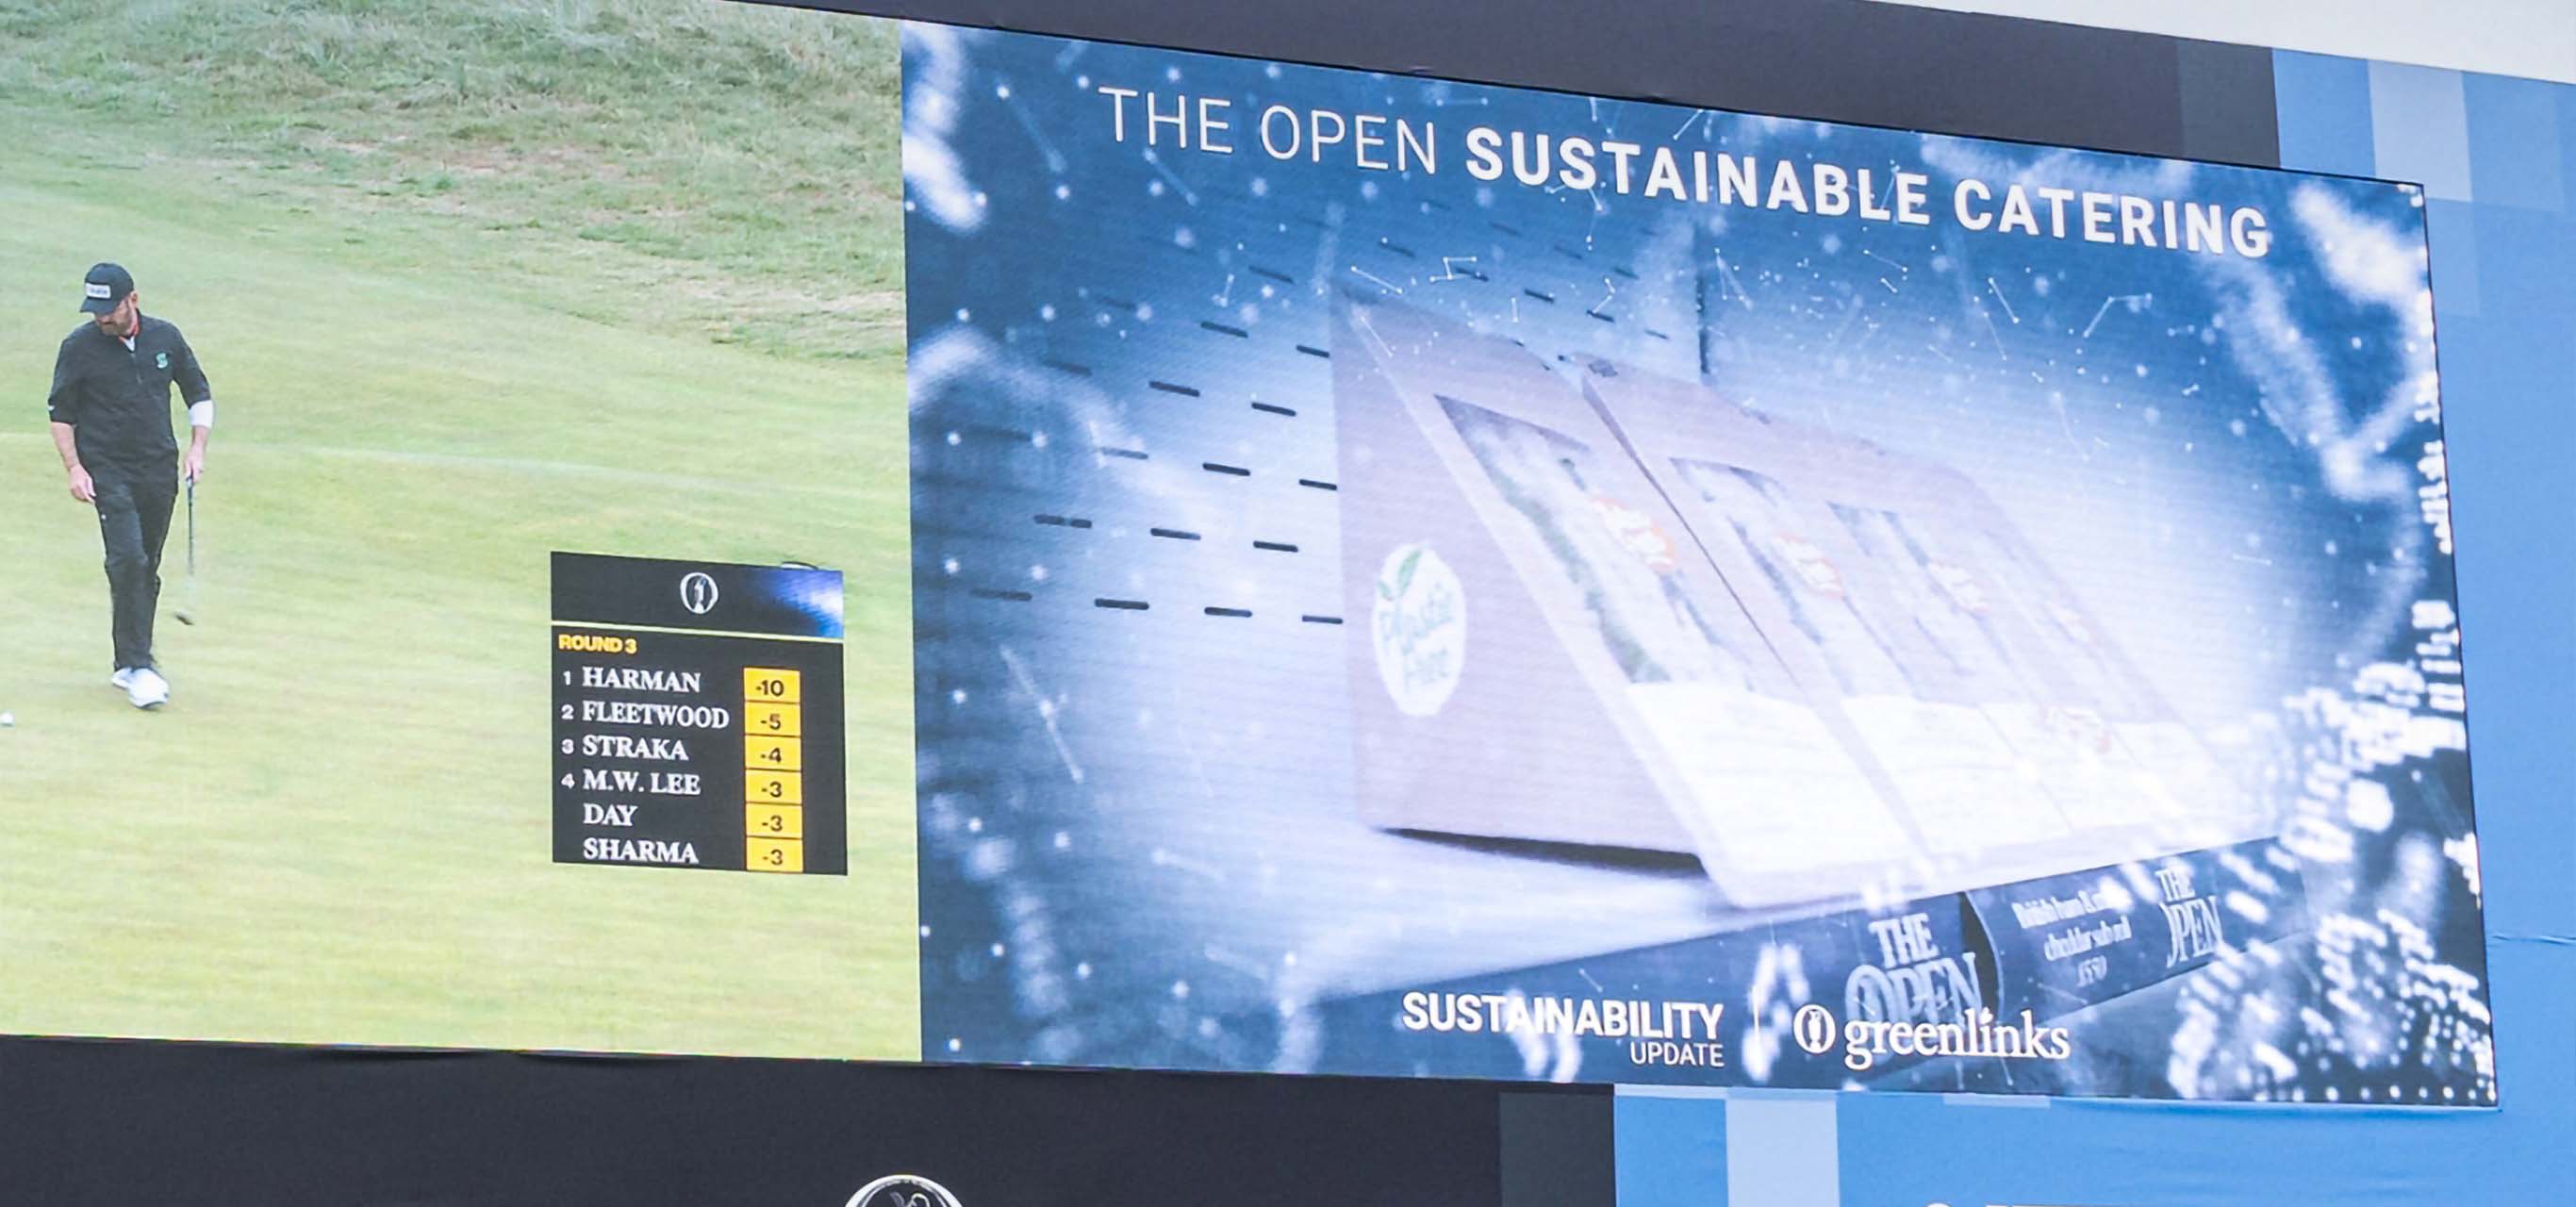 Just another click in the wall? NTT DATA's sustainability initiatives at The Open